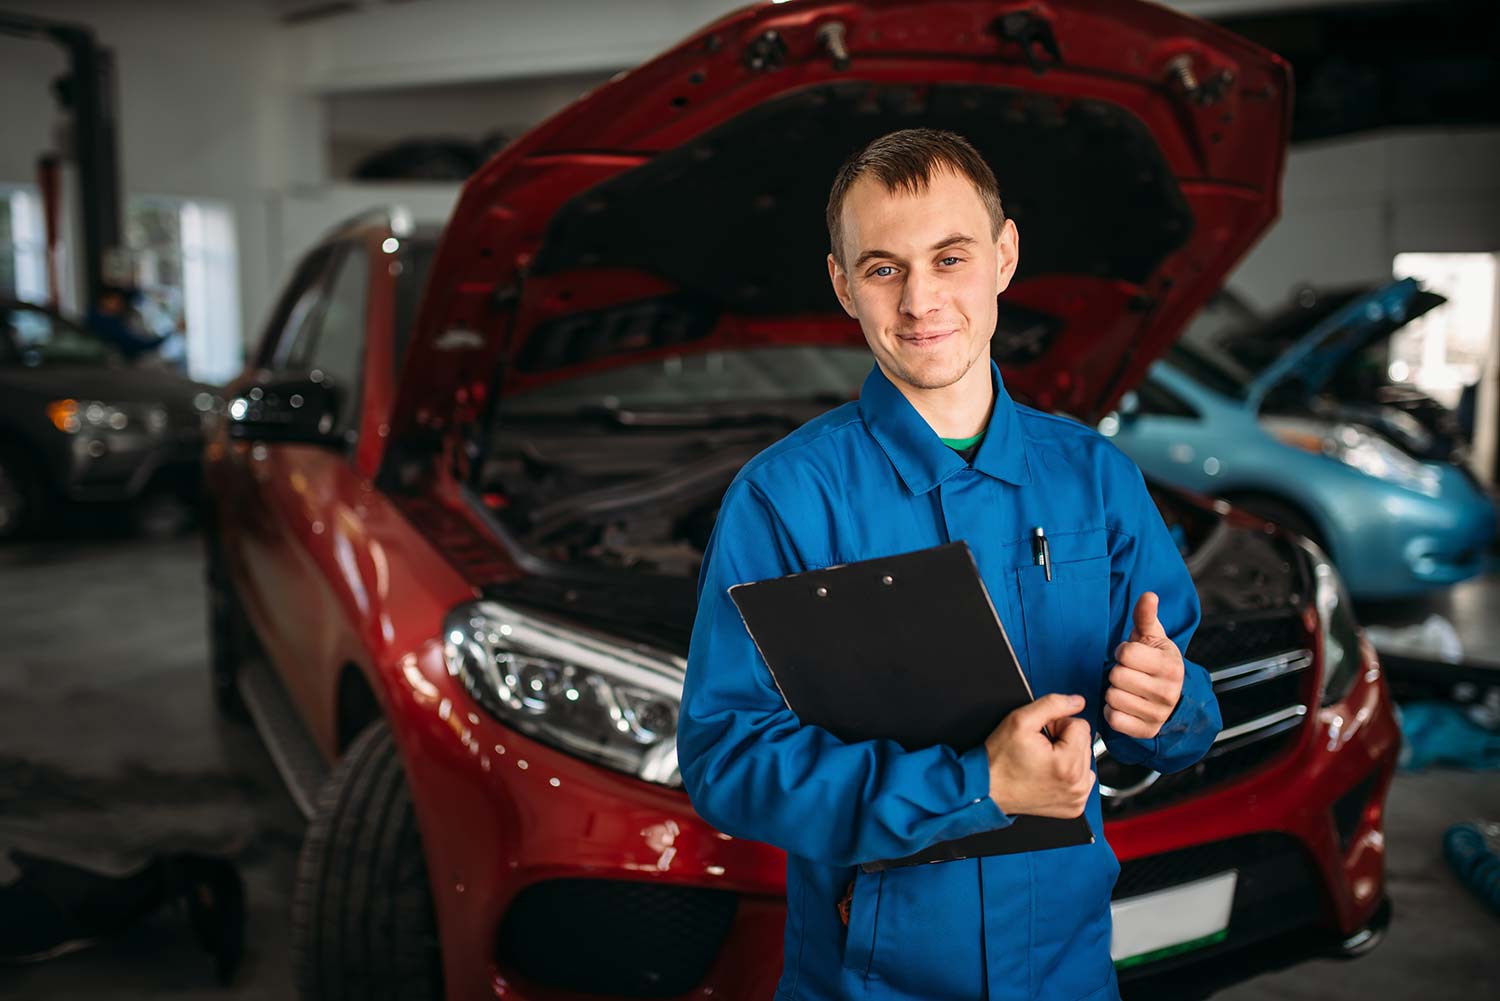 technician-with-notebook-car-with-opened-hood-small.jpg